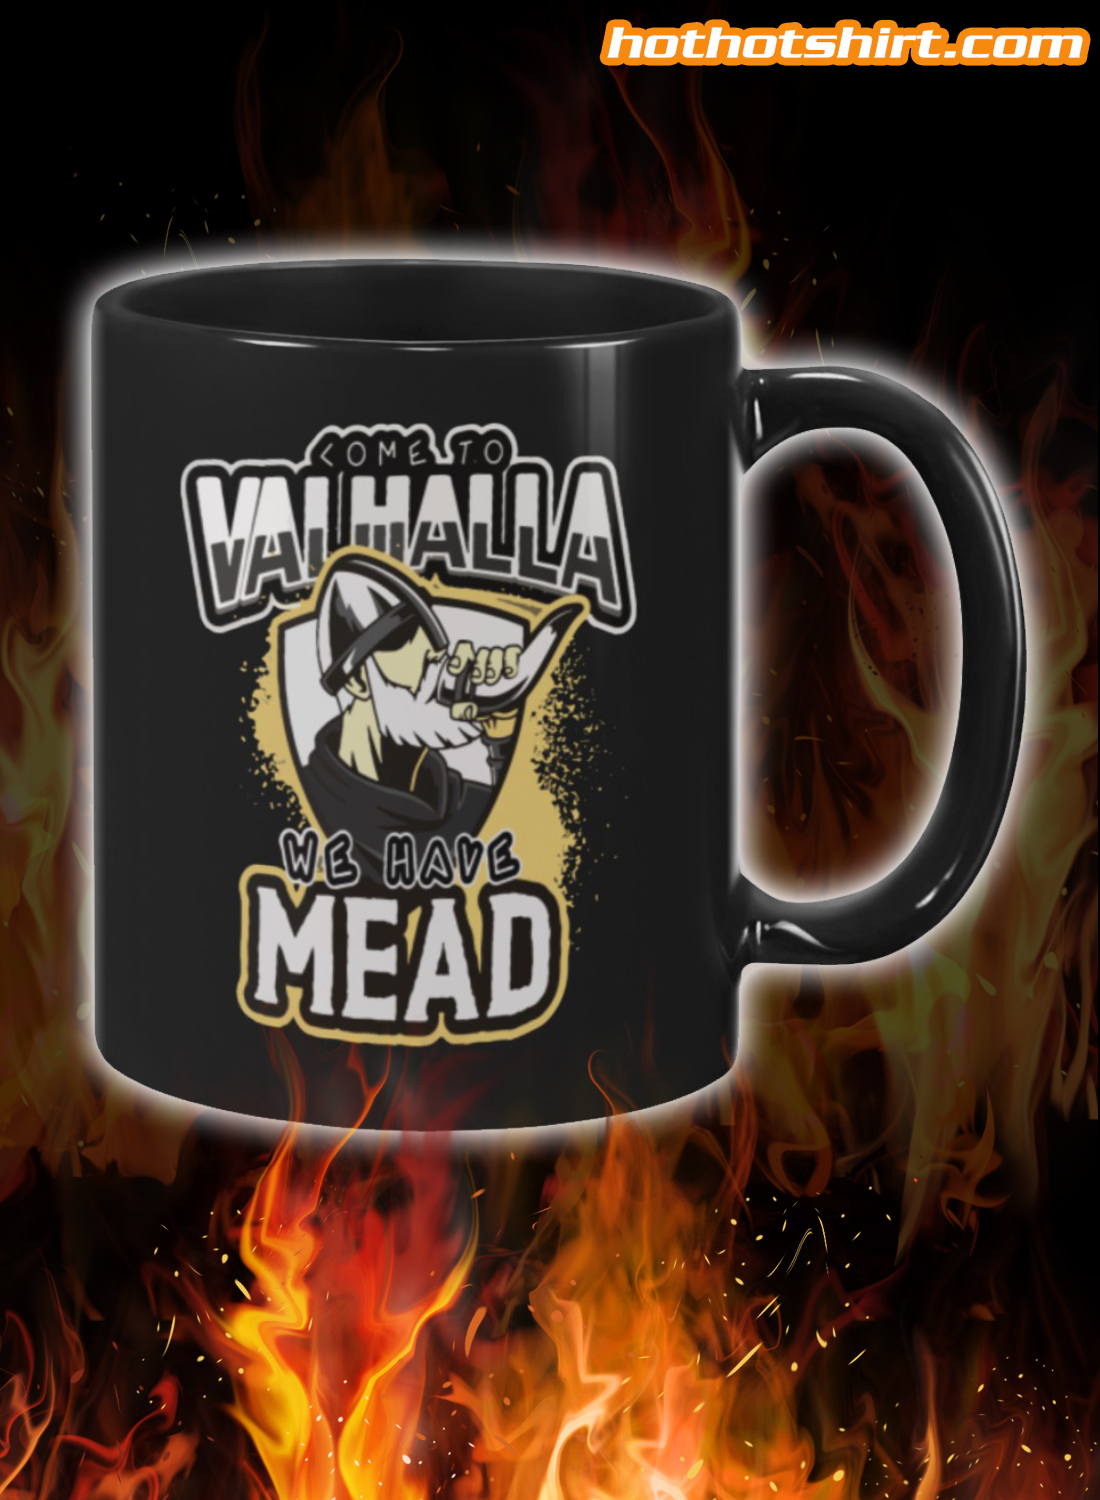 Come to valhalla we have mead mug 1